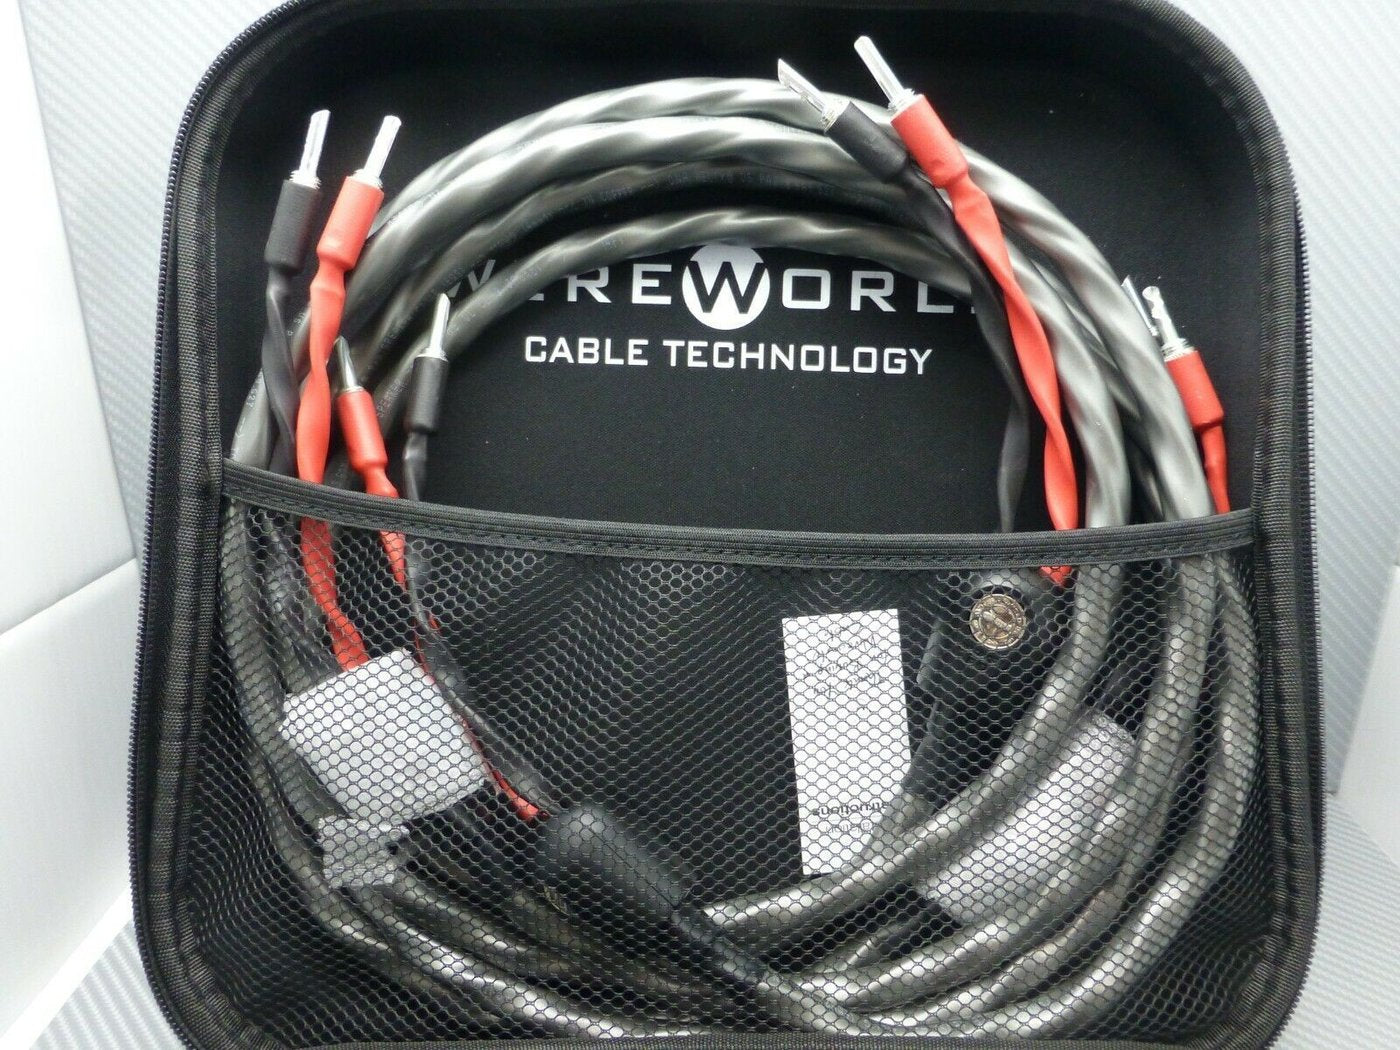 WireWorld Equinox 8 pair of speaker cables